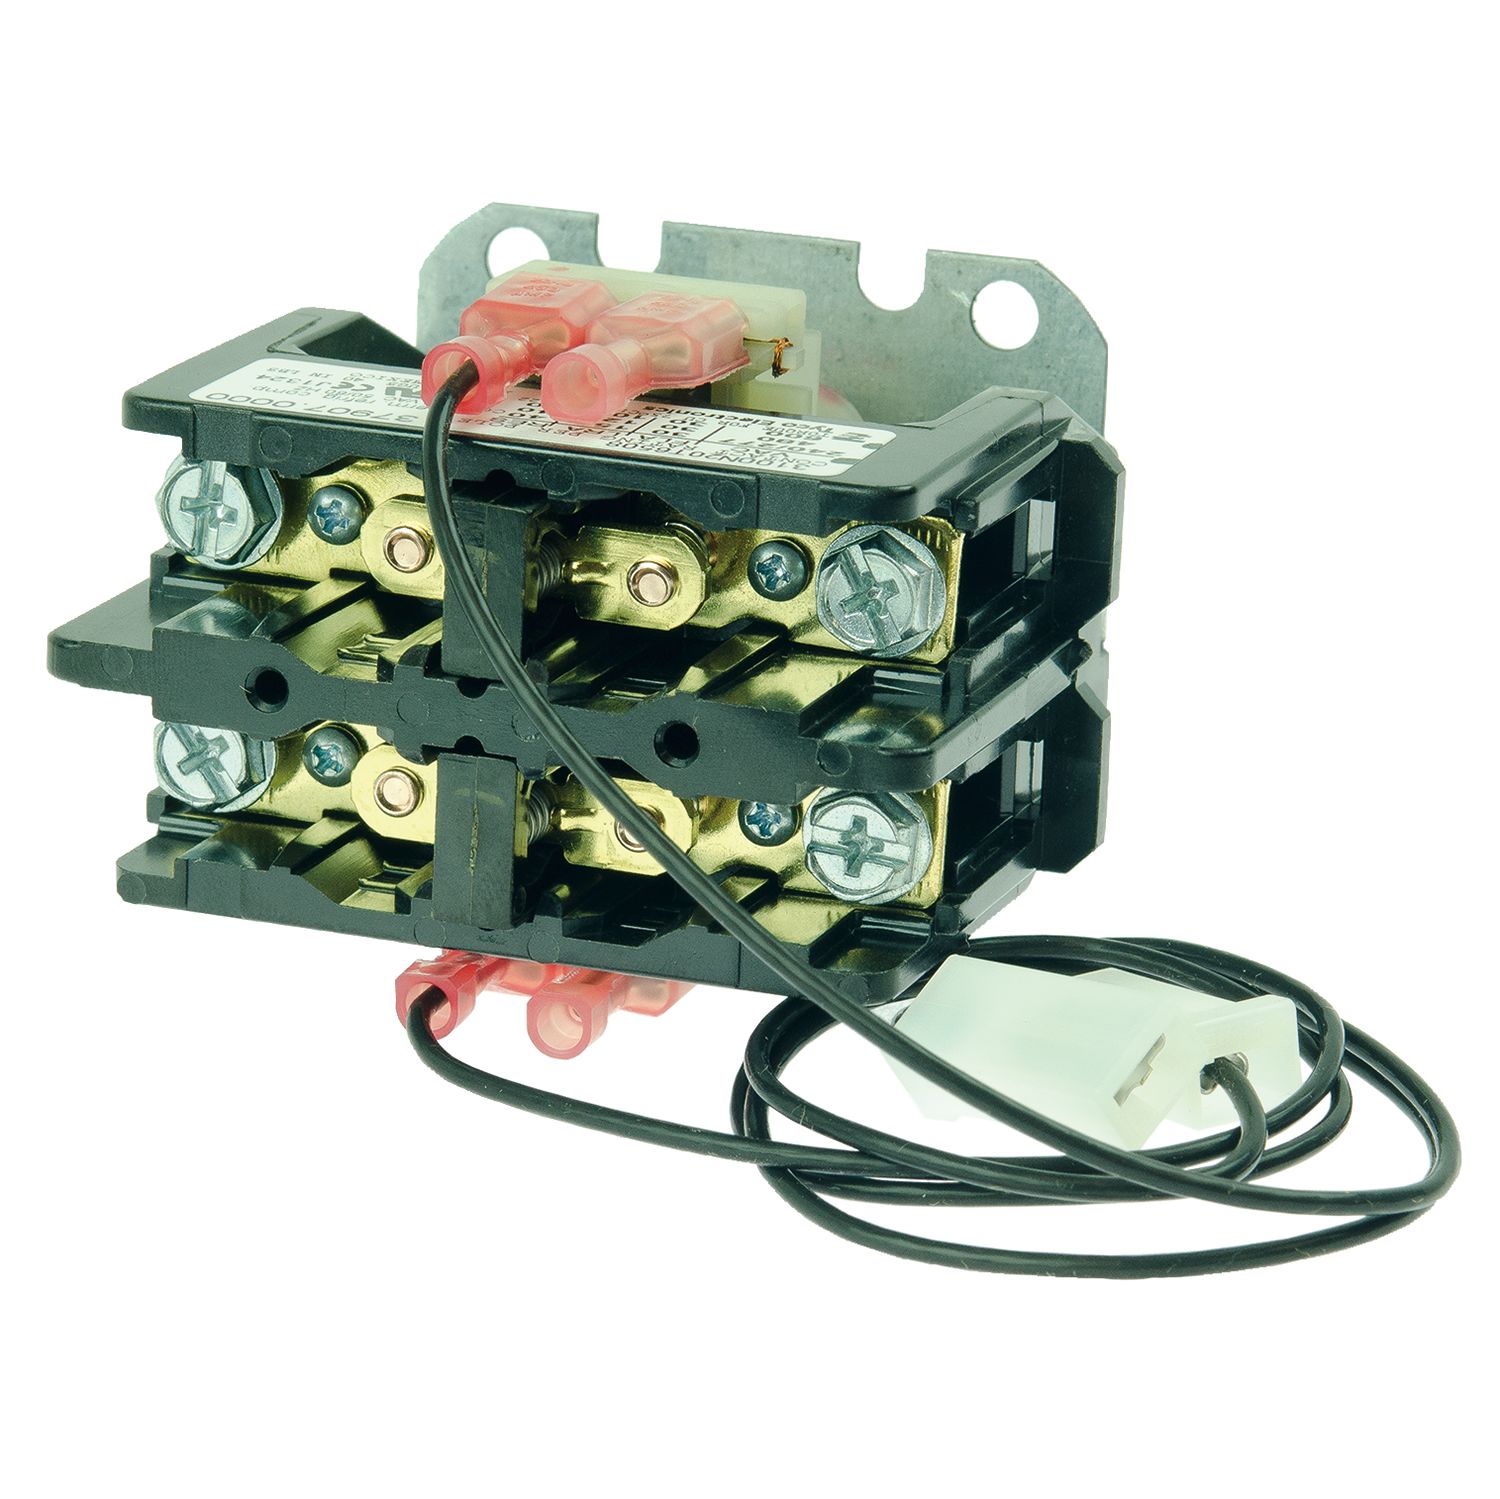 KIT, CONTACTOR ASSY 120V COIL - Electric/Electronic - BUNN 